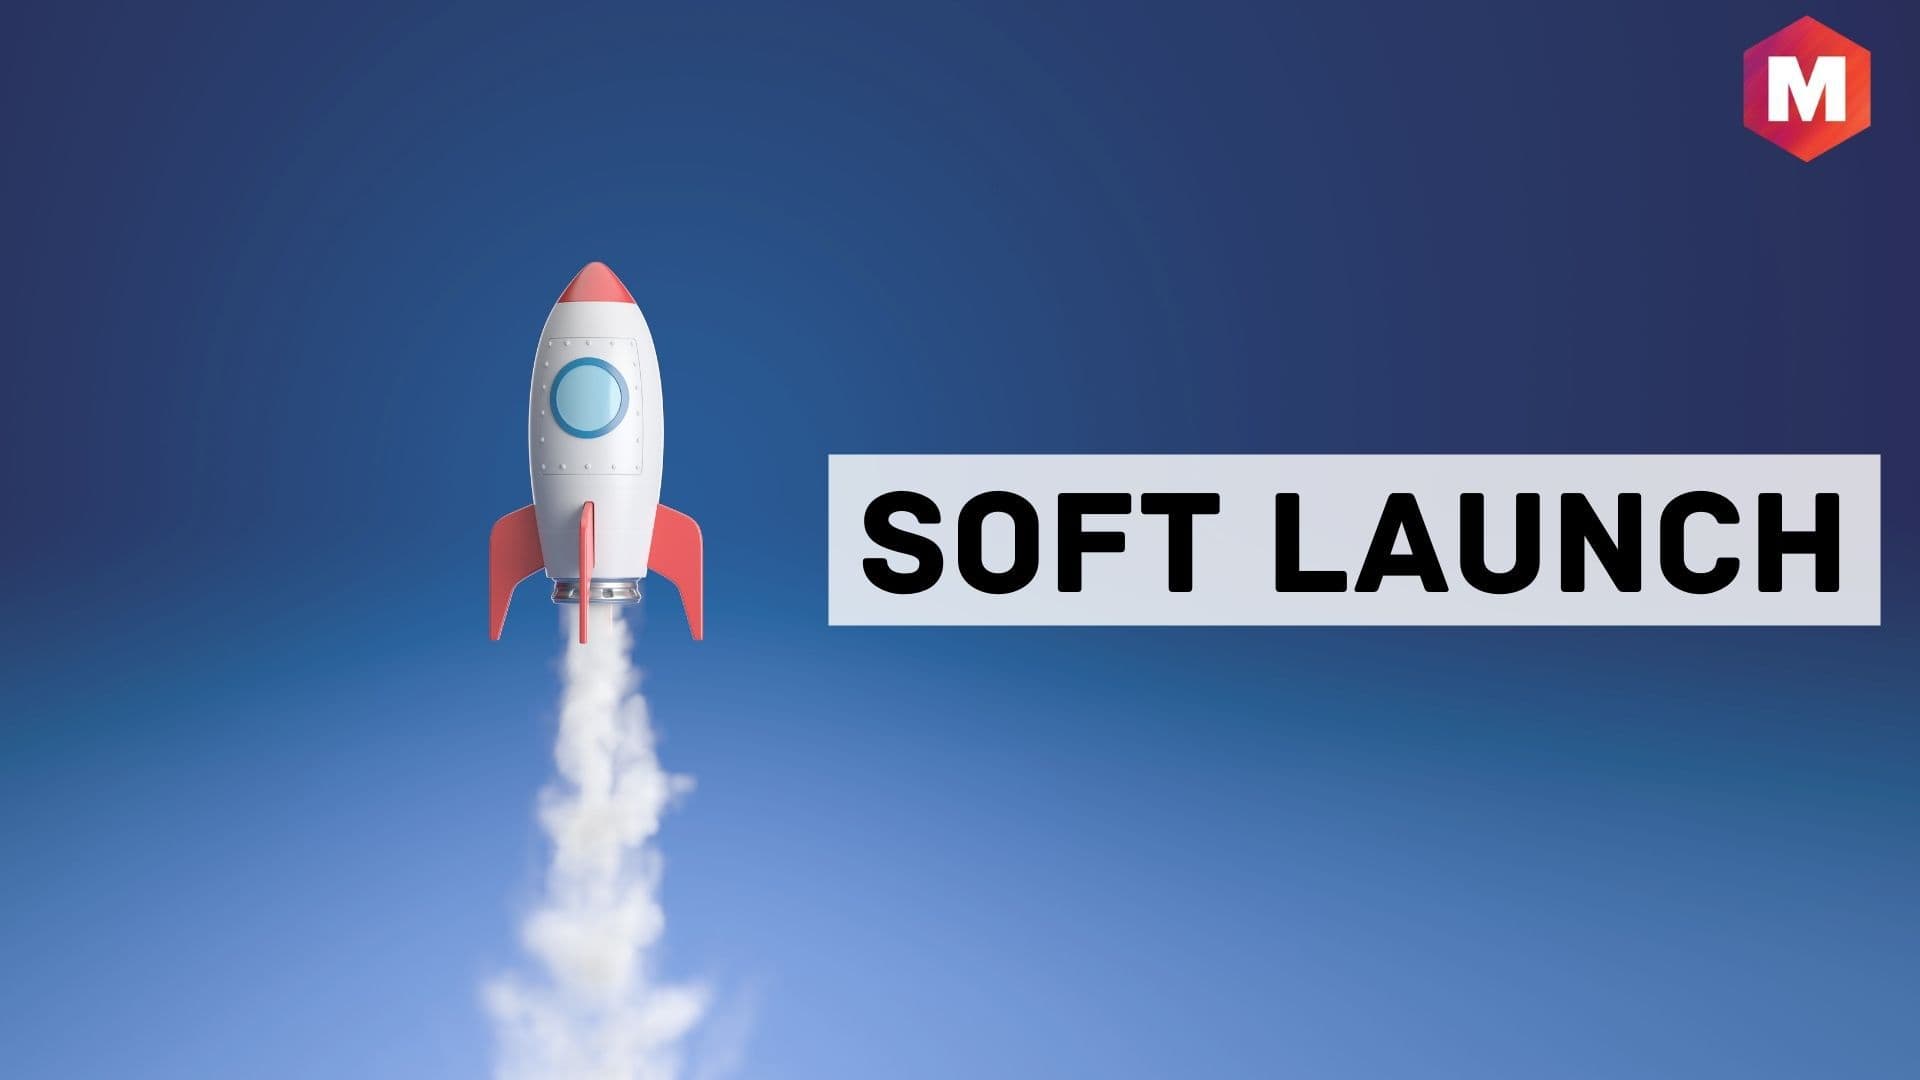 Soft Launch - Definition, Advantages, Strategy and Examples